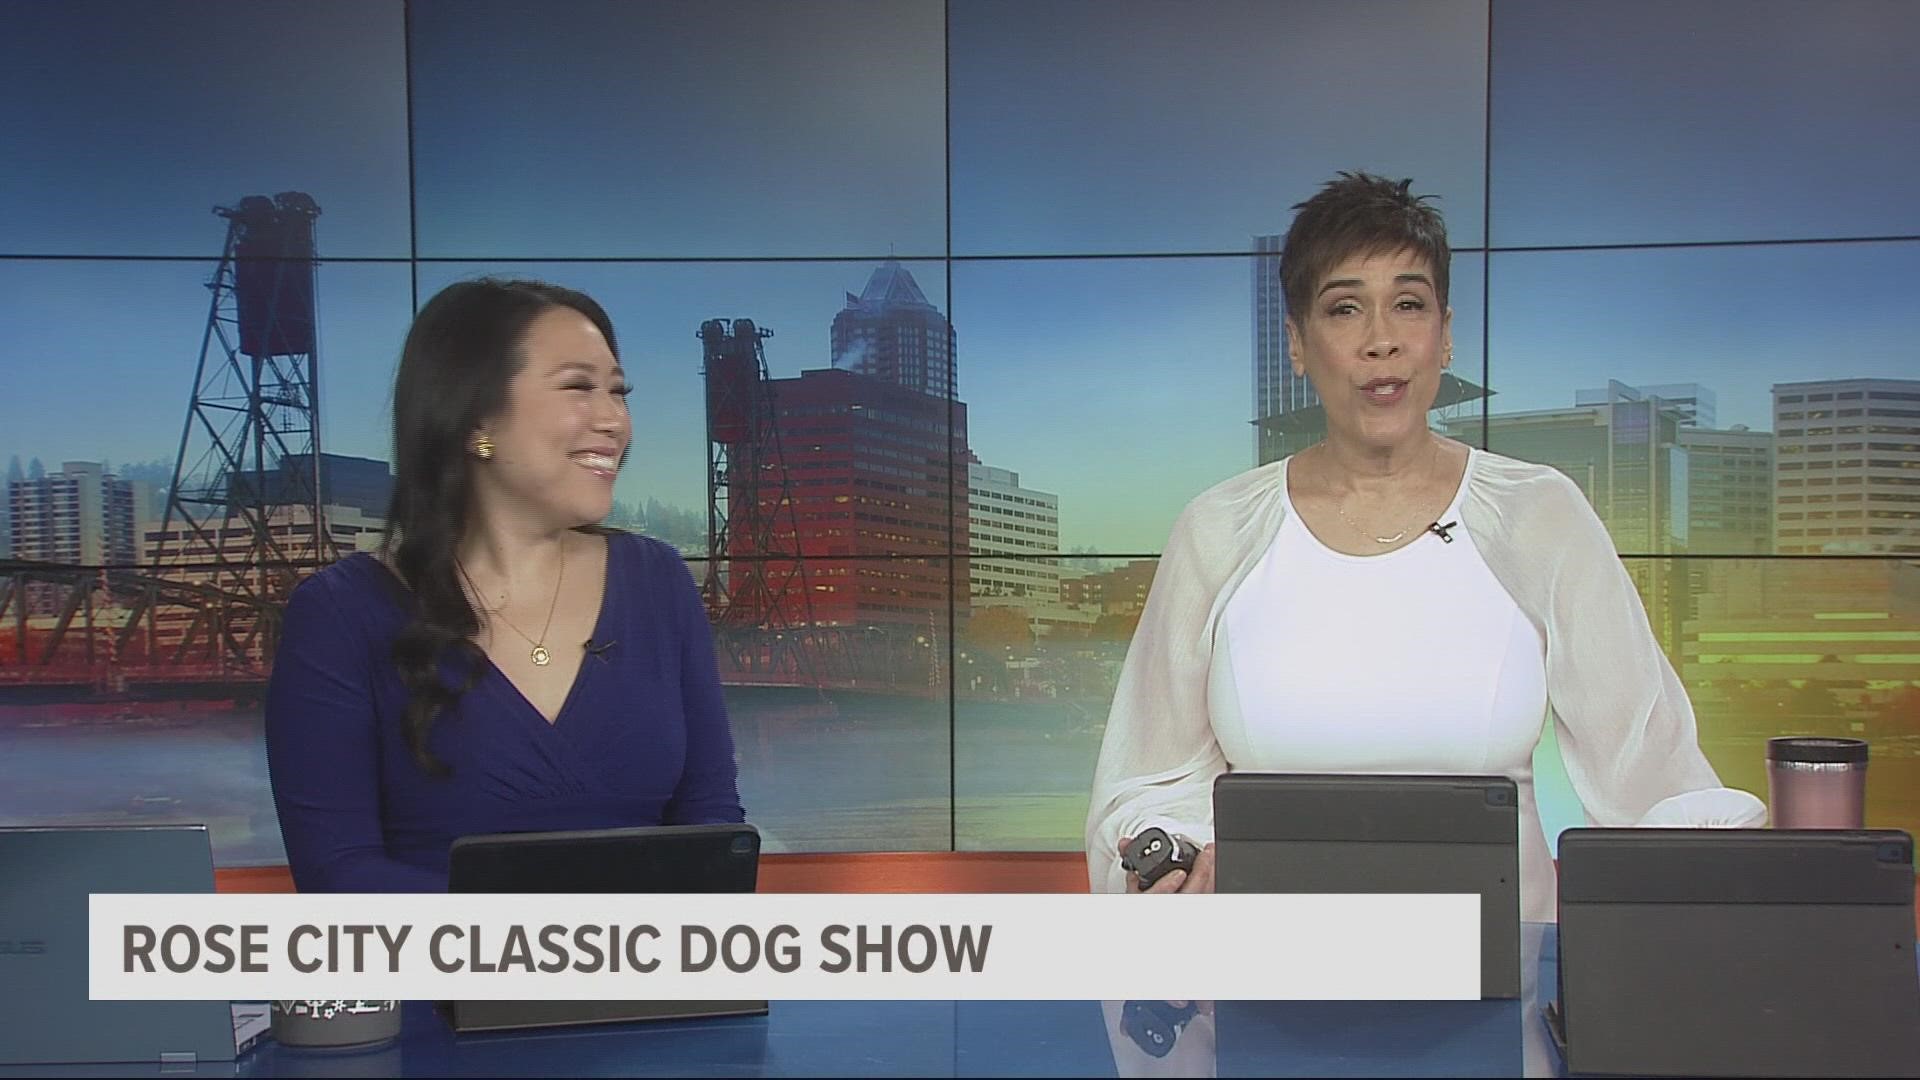 The Rose City Classic Dog Show, the biggest dog show series in the Pacific Northwest, takes place Jan. 18-22 at the Portland Expo Center.